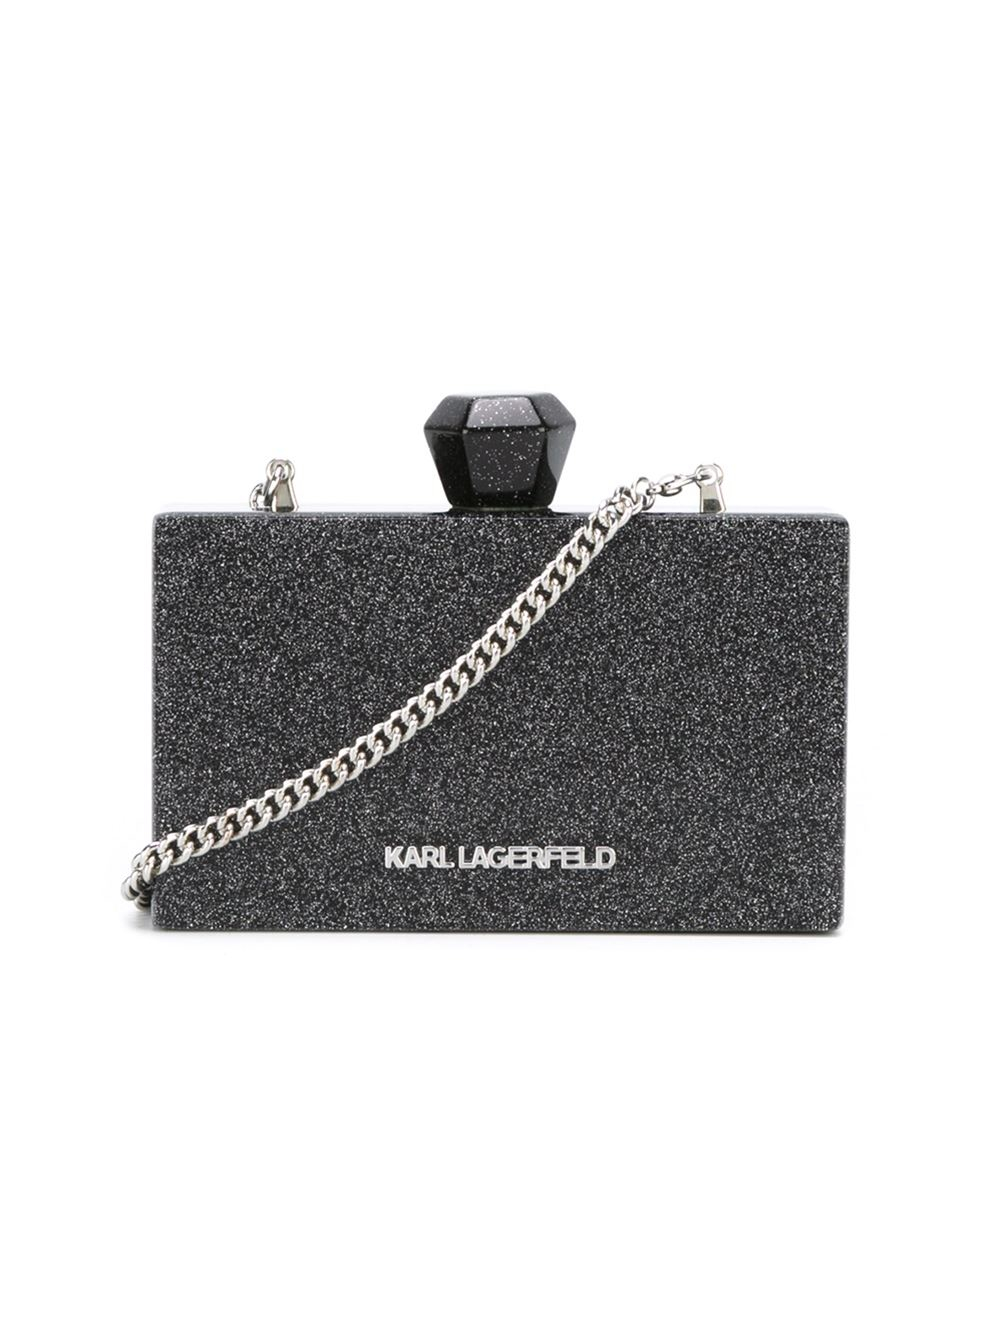 Karl Lagerfeld Authenticated Leather Clutch Bag